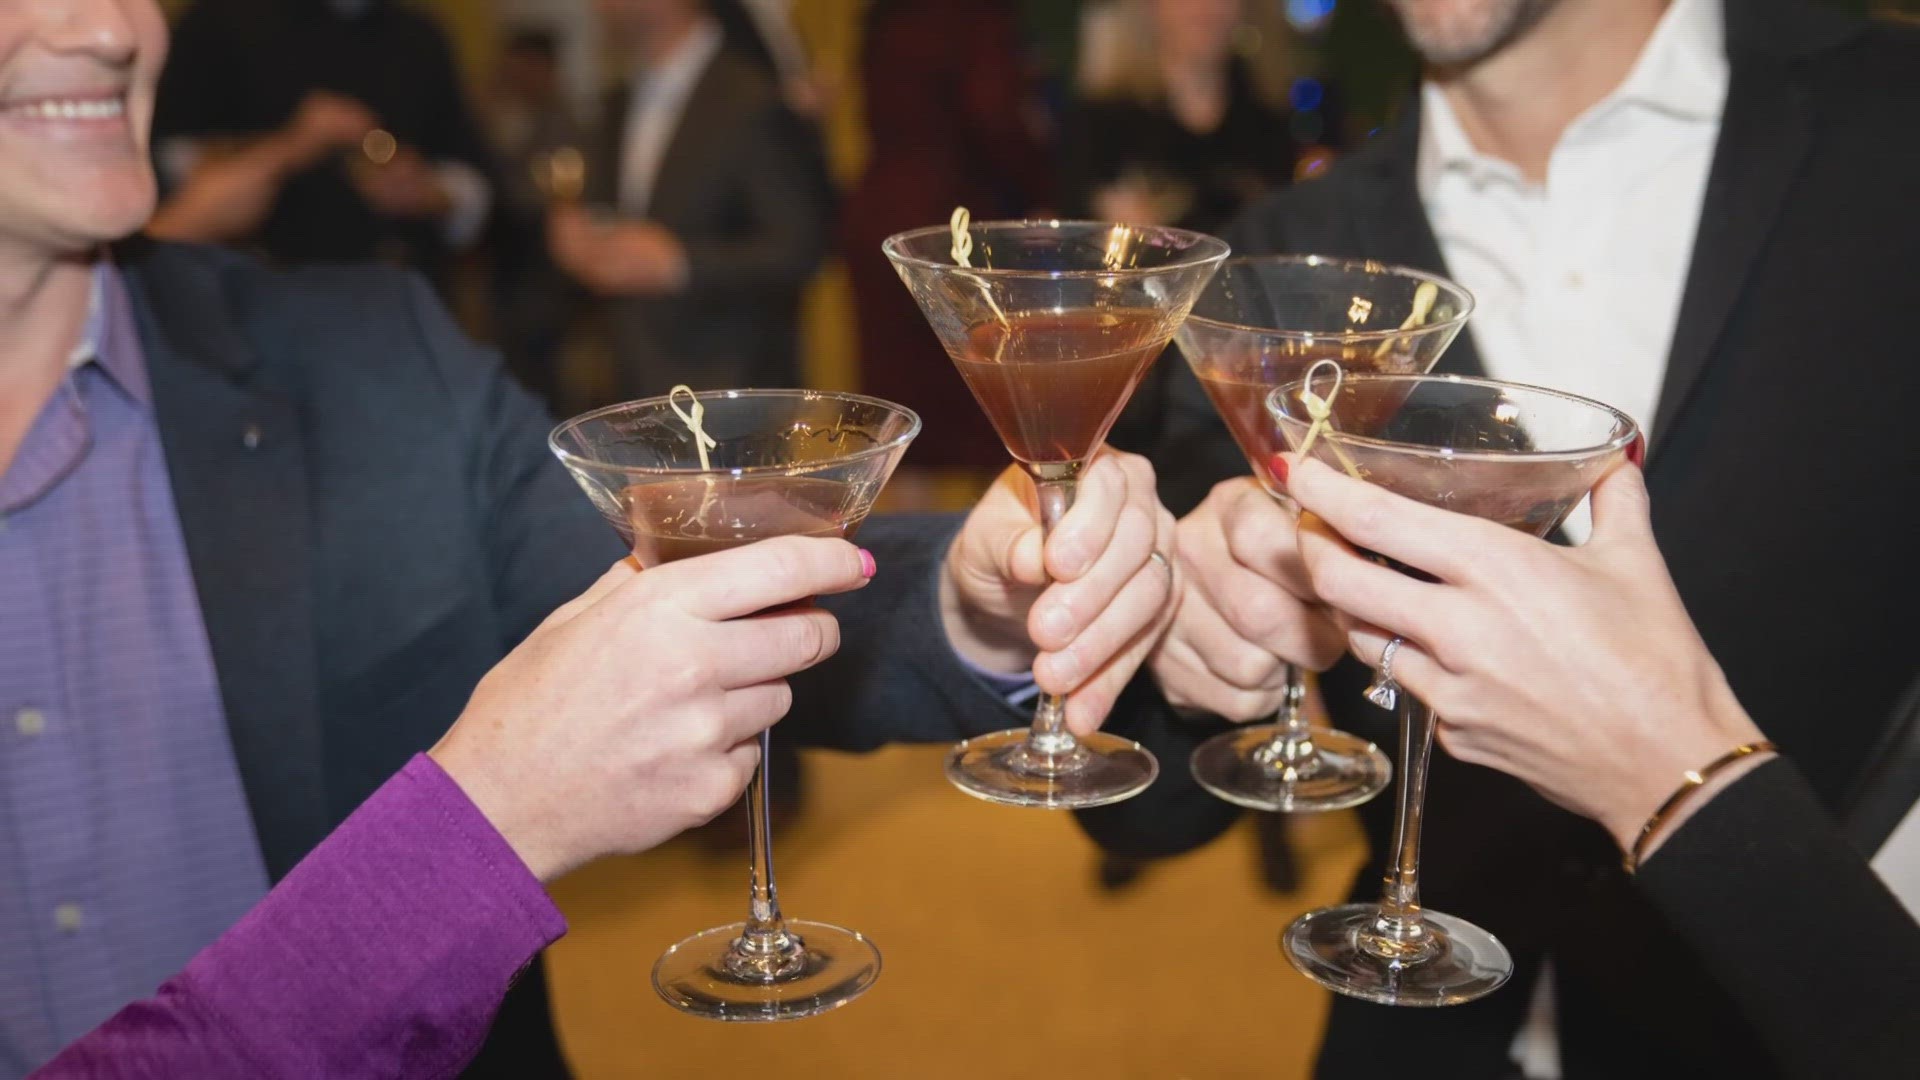 The Shaken, Not Stirred Martini Party fundraiser supporting Boys Hope, Girls Hope of Colorado is back this weekend at Mile High Station in downtown Denver.